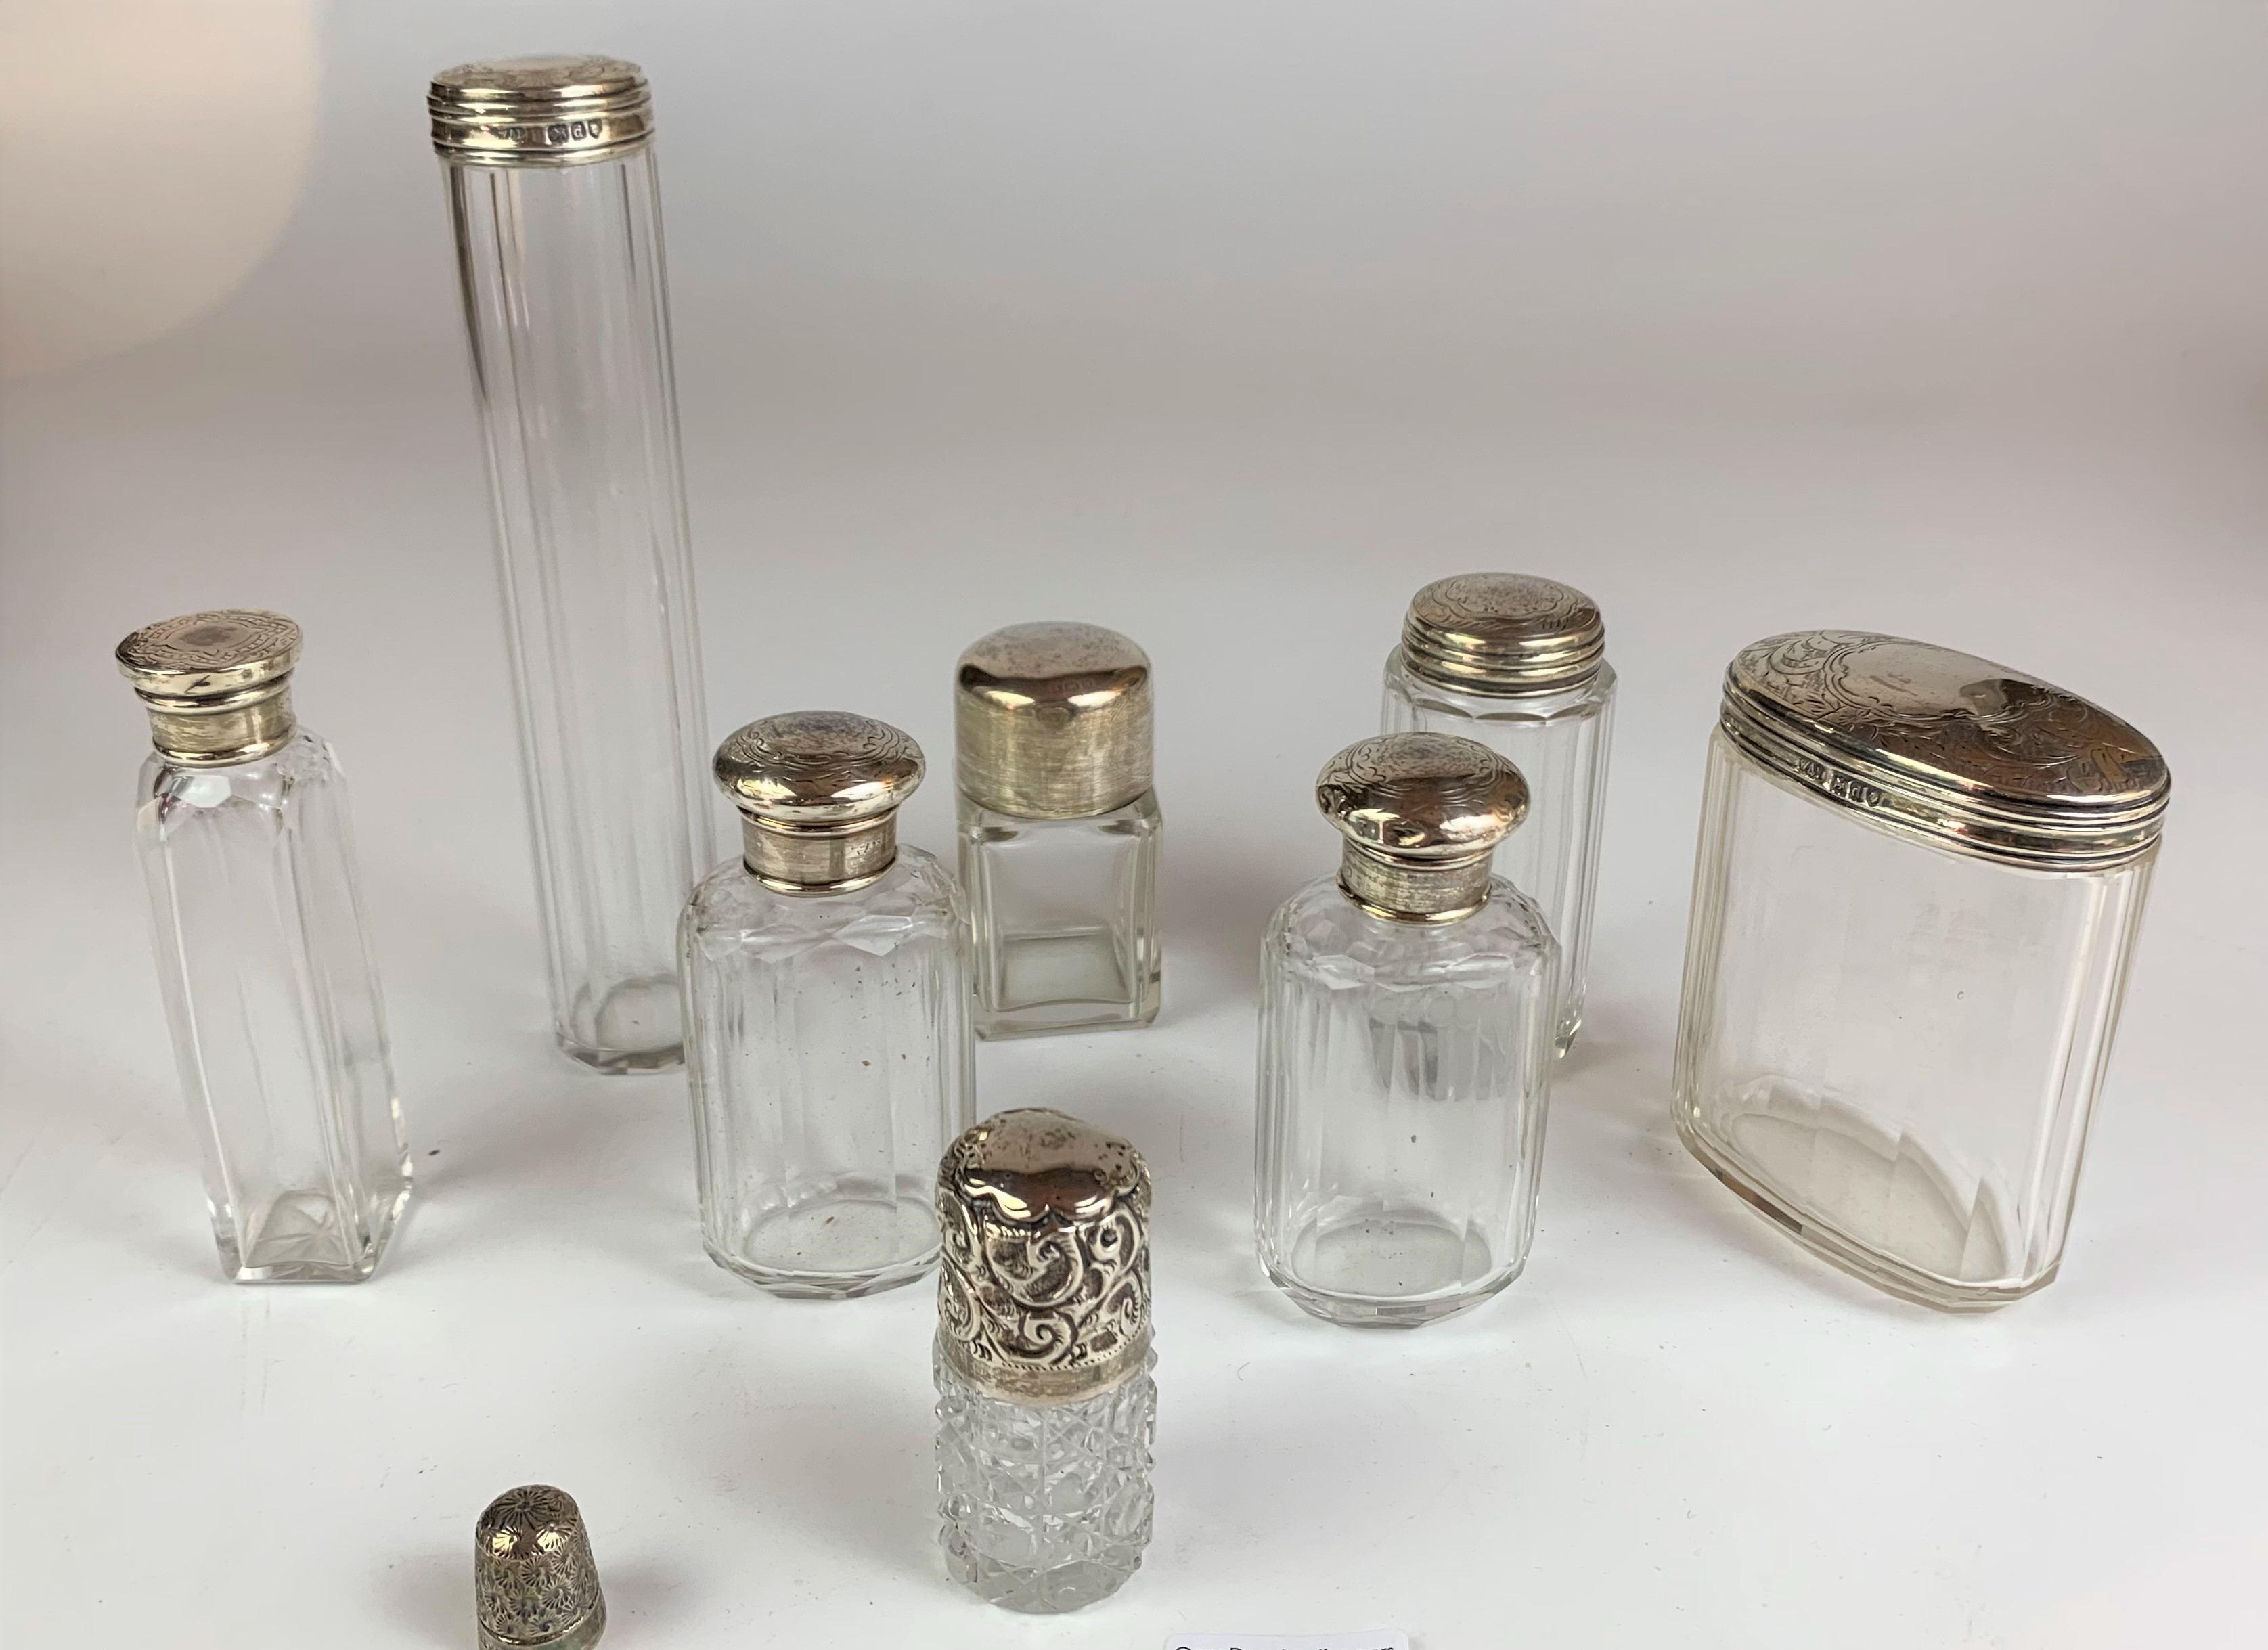 8 assorted silver topped glass bottles and silver thimble, tallest bottle 7” high